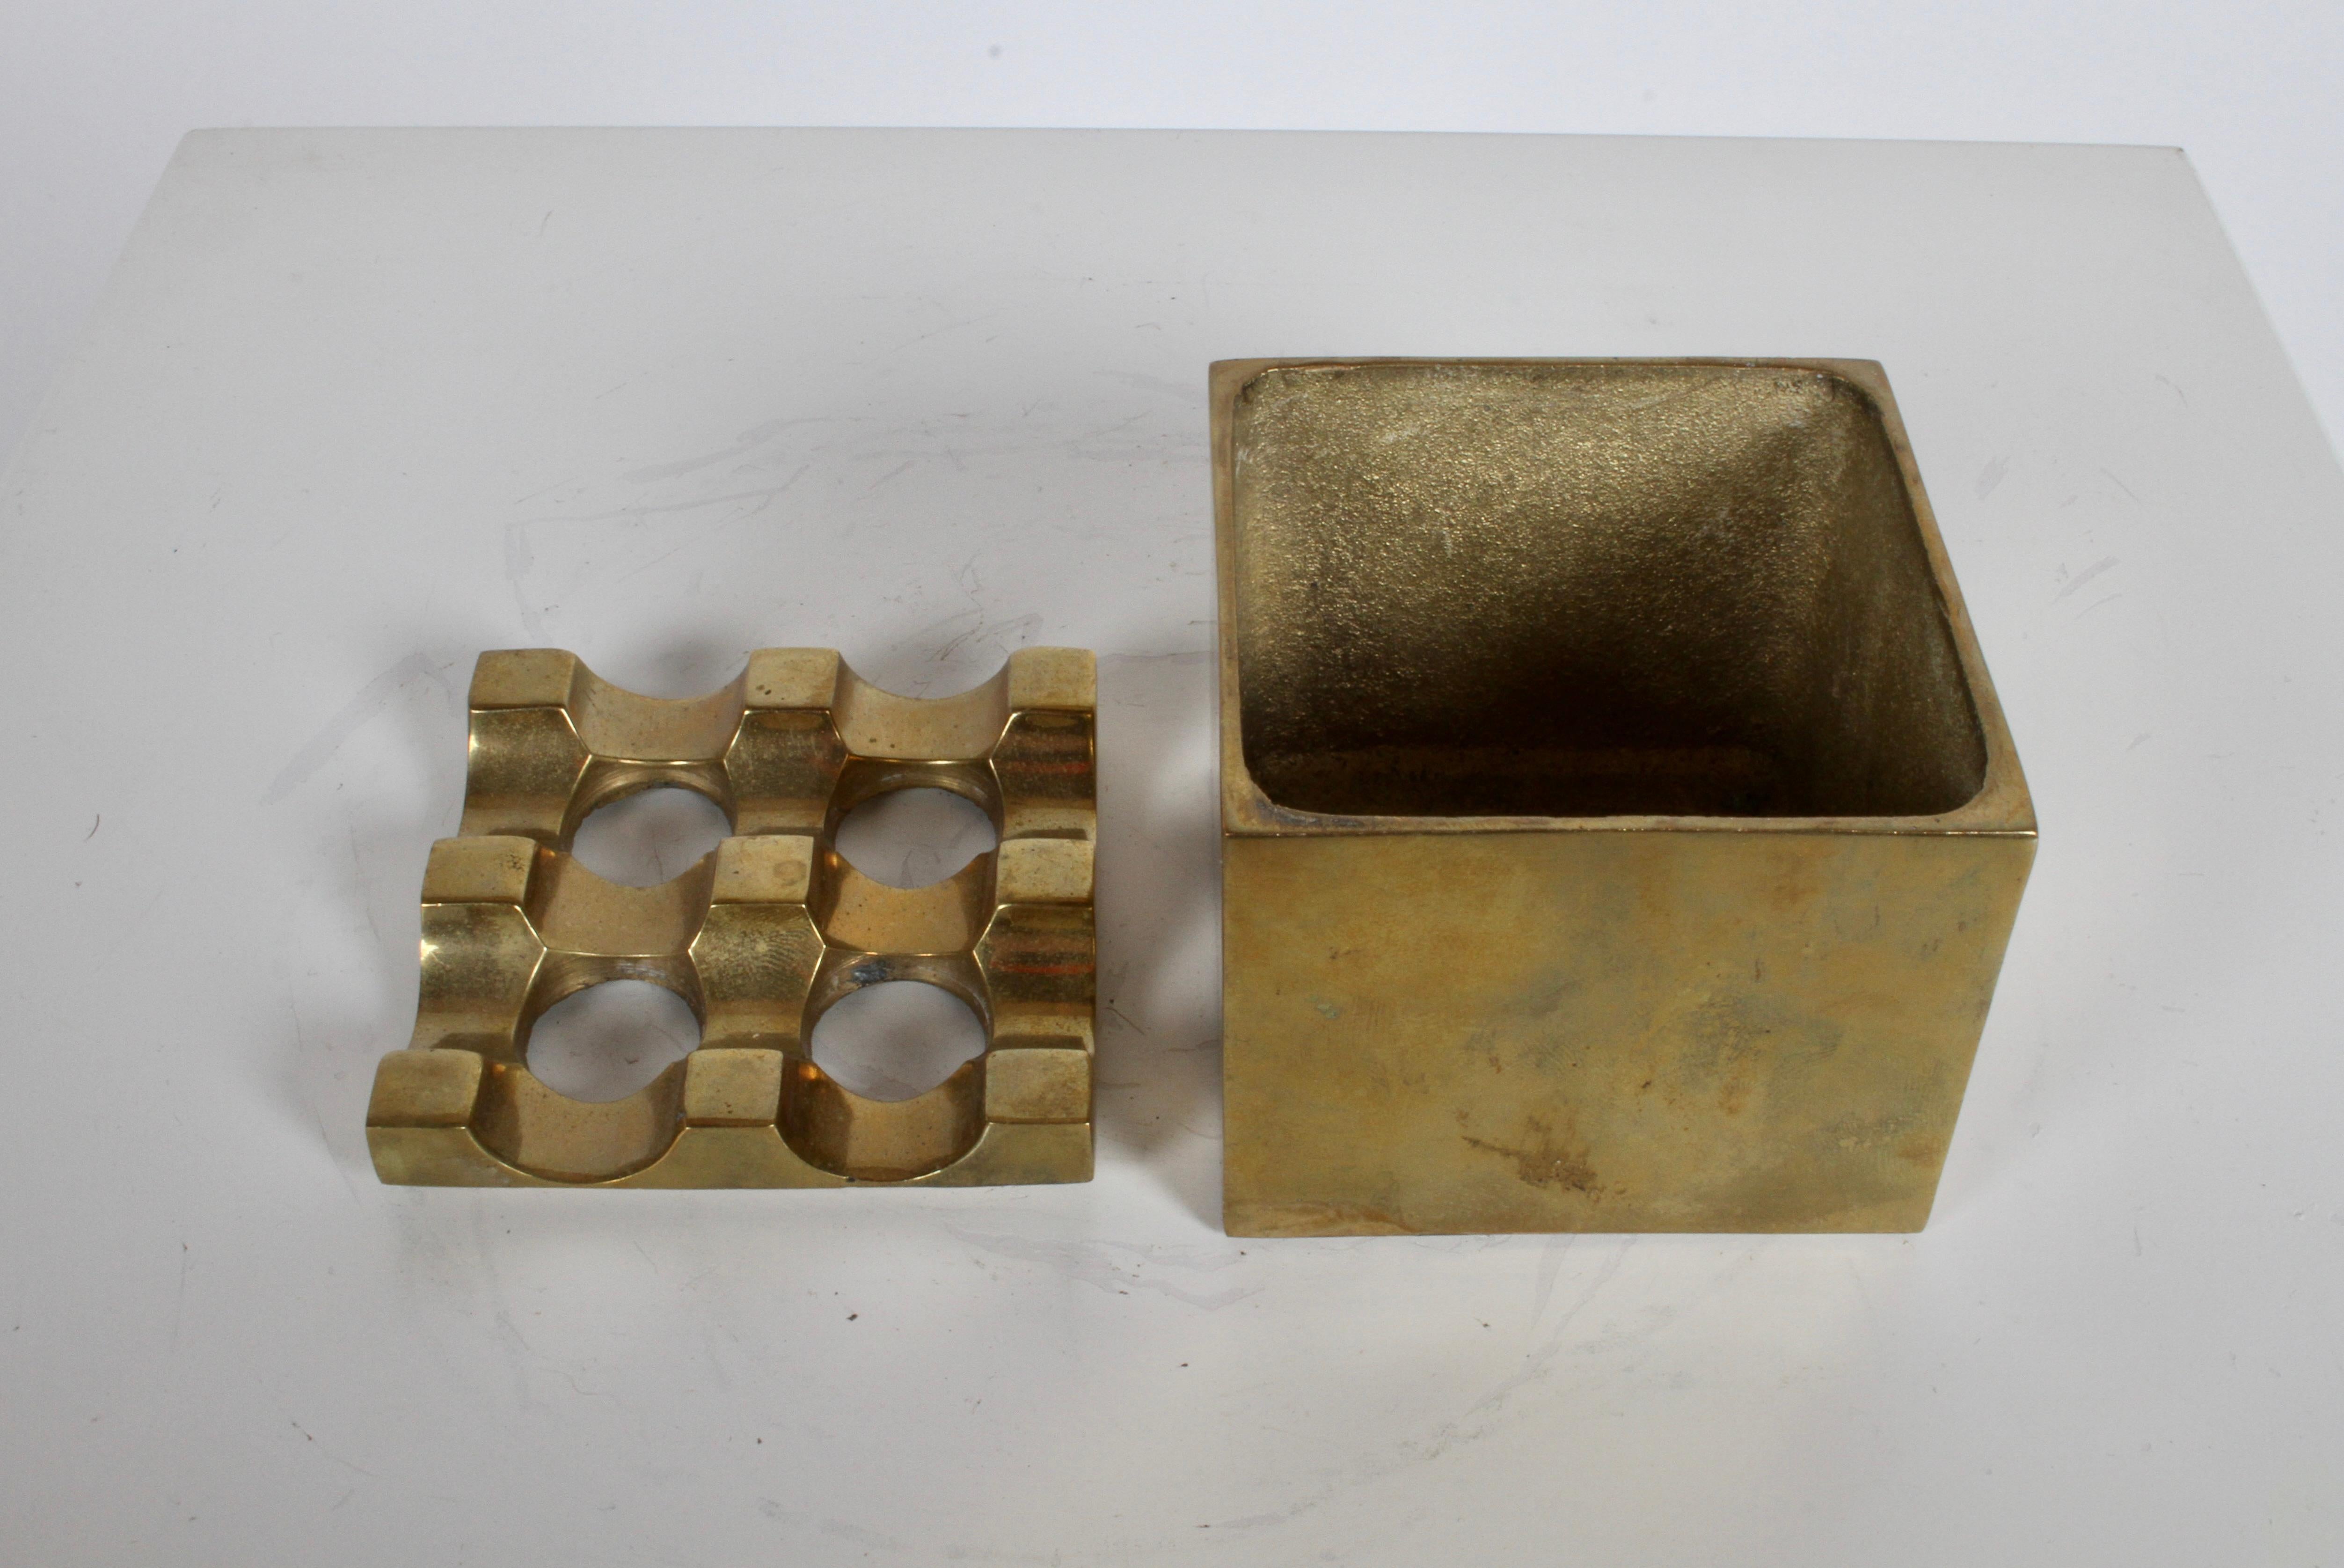 Mid-Century Mod Op-Art Brass Cube Ashtray Ultima by Ljungberg & Backström Sweden In Good Condition For Sale In St. Louis, MO